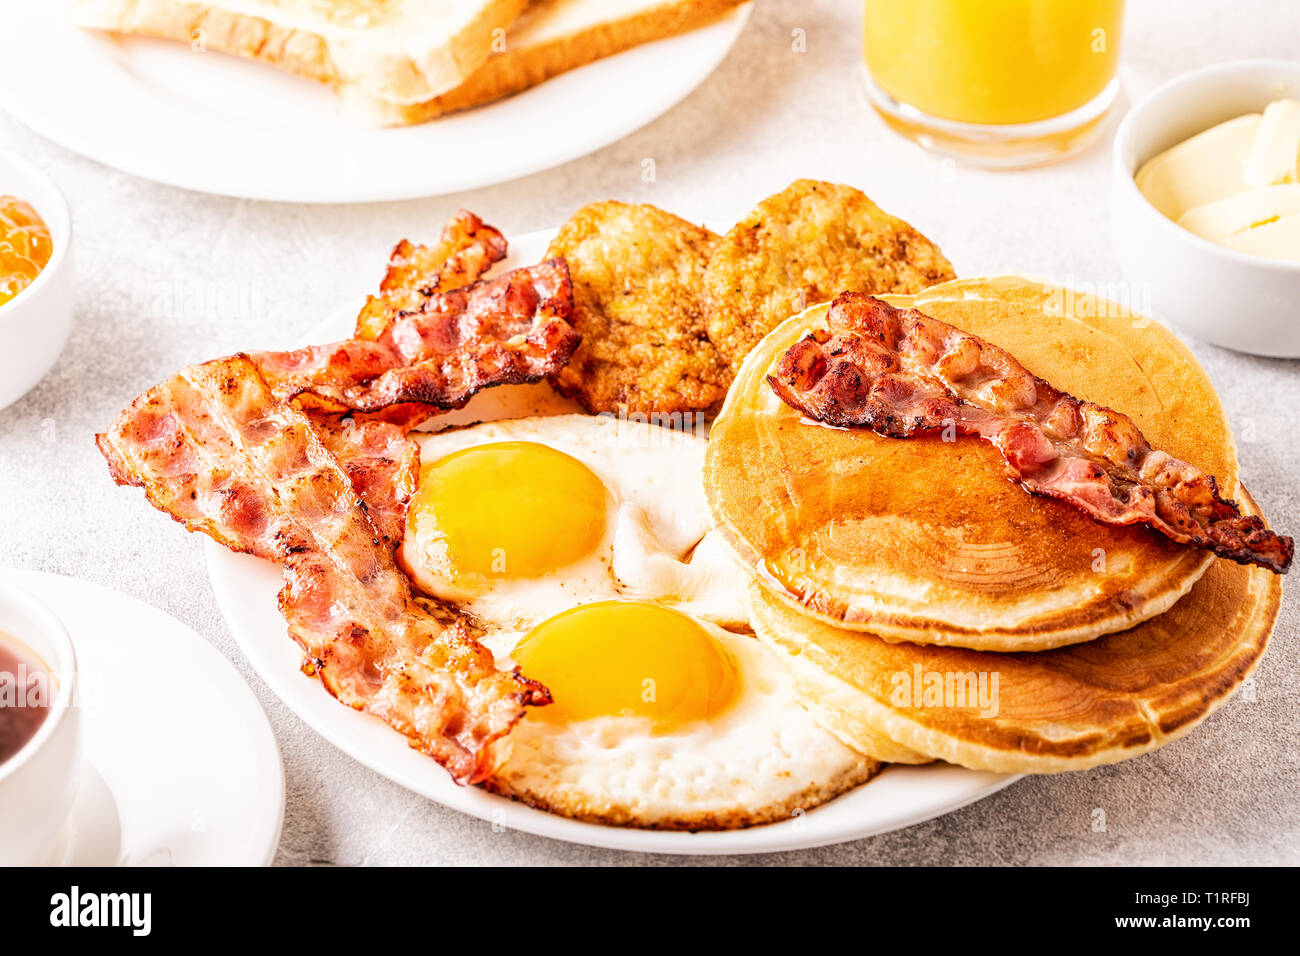 Healthy Full American Breakfast with Eggs Bacon Pancakes and Latkes, selective focus. Stock Photo